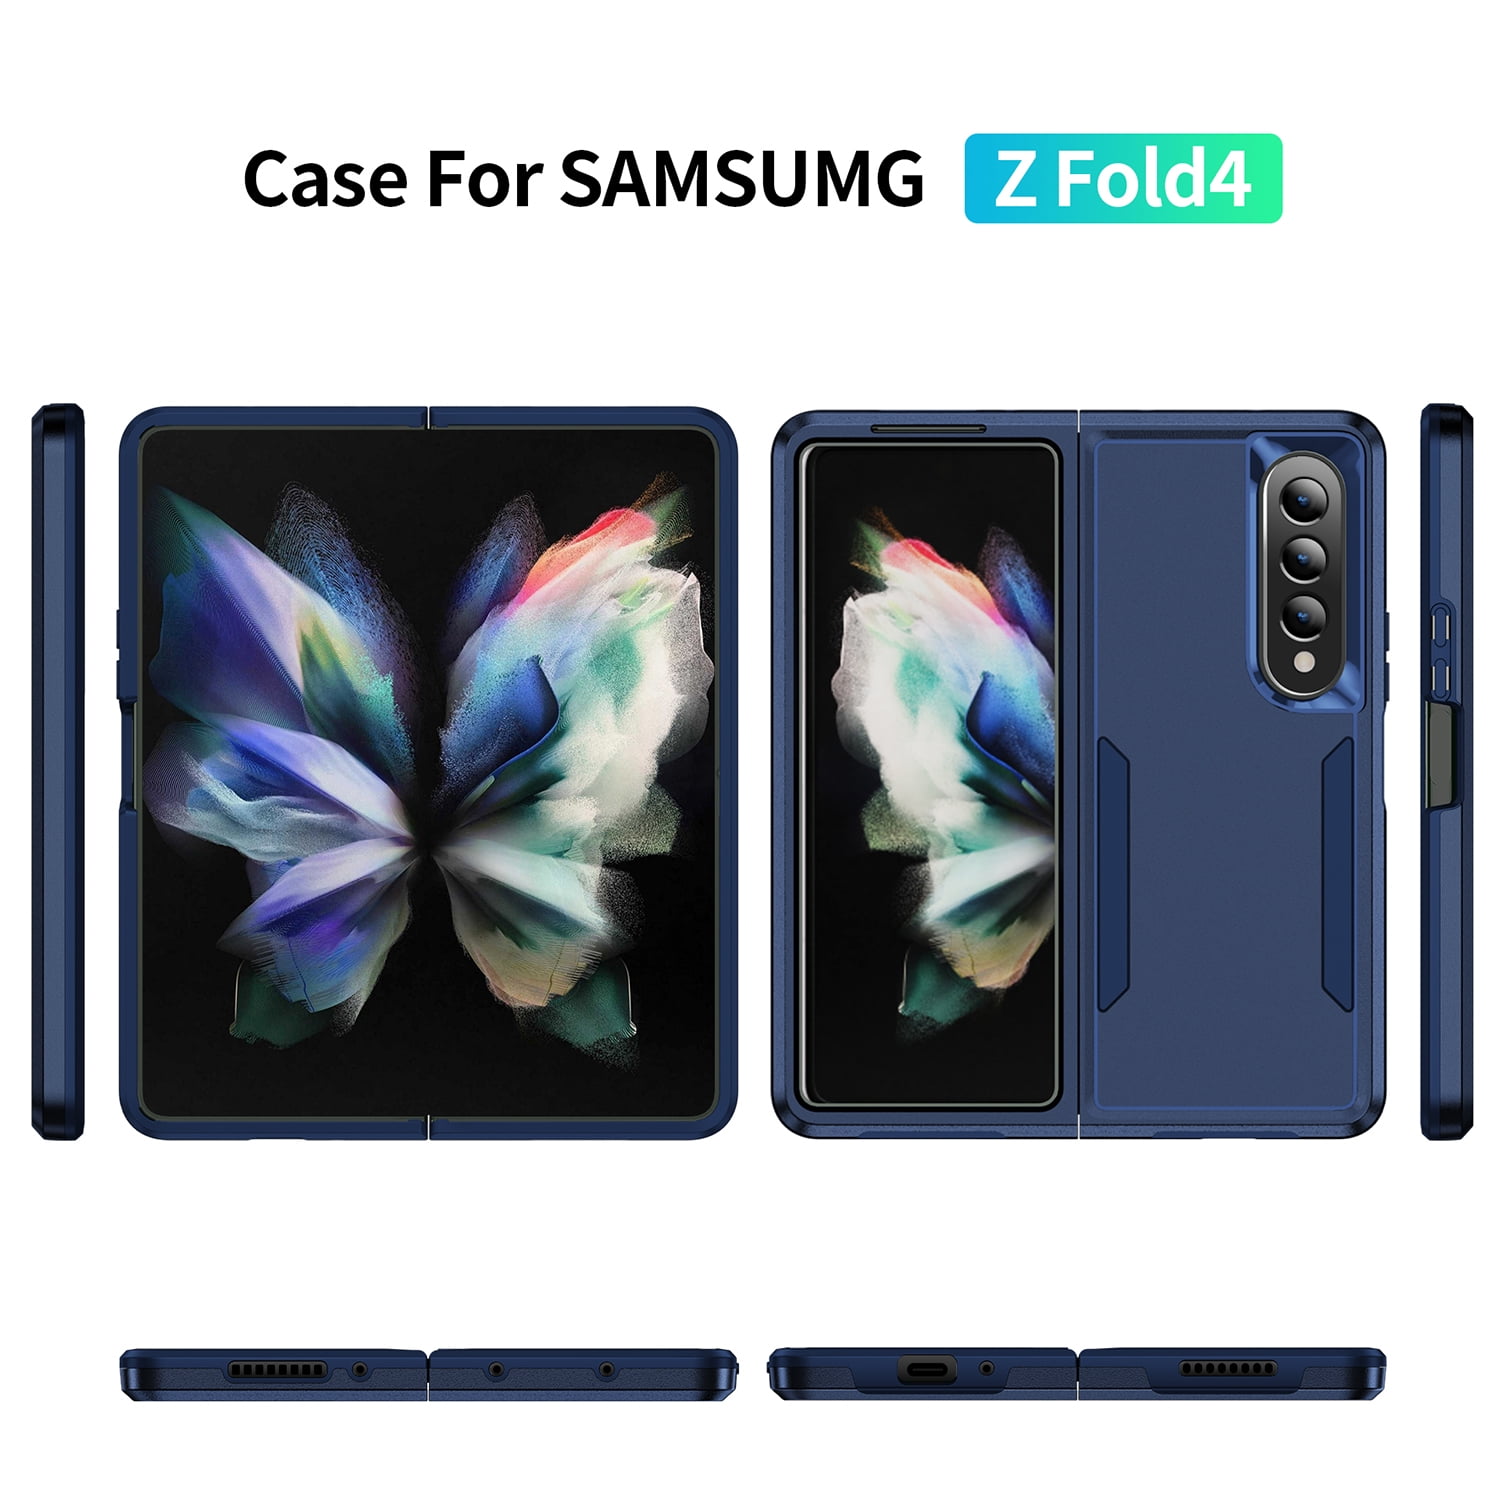  SHIEID Samsung Z Fold 4 Case, Galaxy Z Fold 4 Case Ultra-Thin  Tempered Glass Phone Case Protective Cover for Samsung Galaxy Z Fold 4  Fashion Electroplated PC Back Cover, Chess Brown 